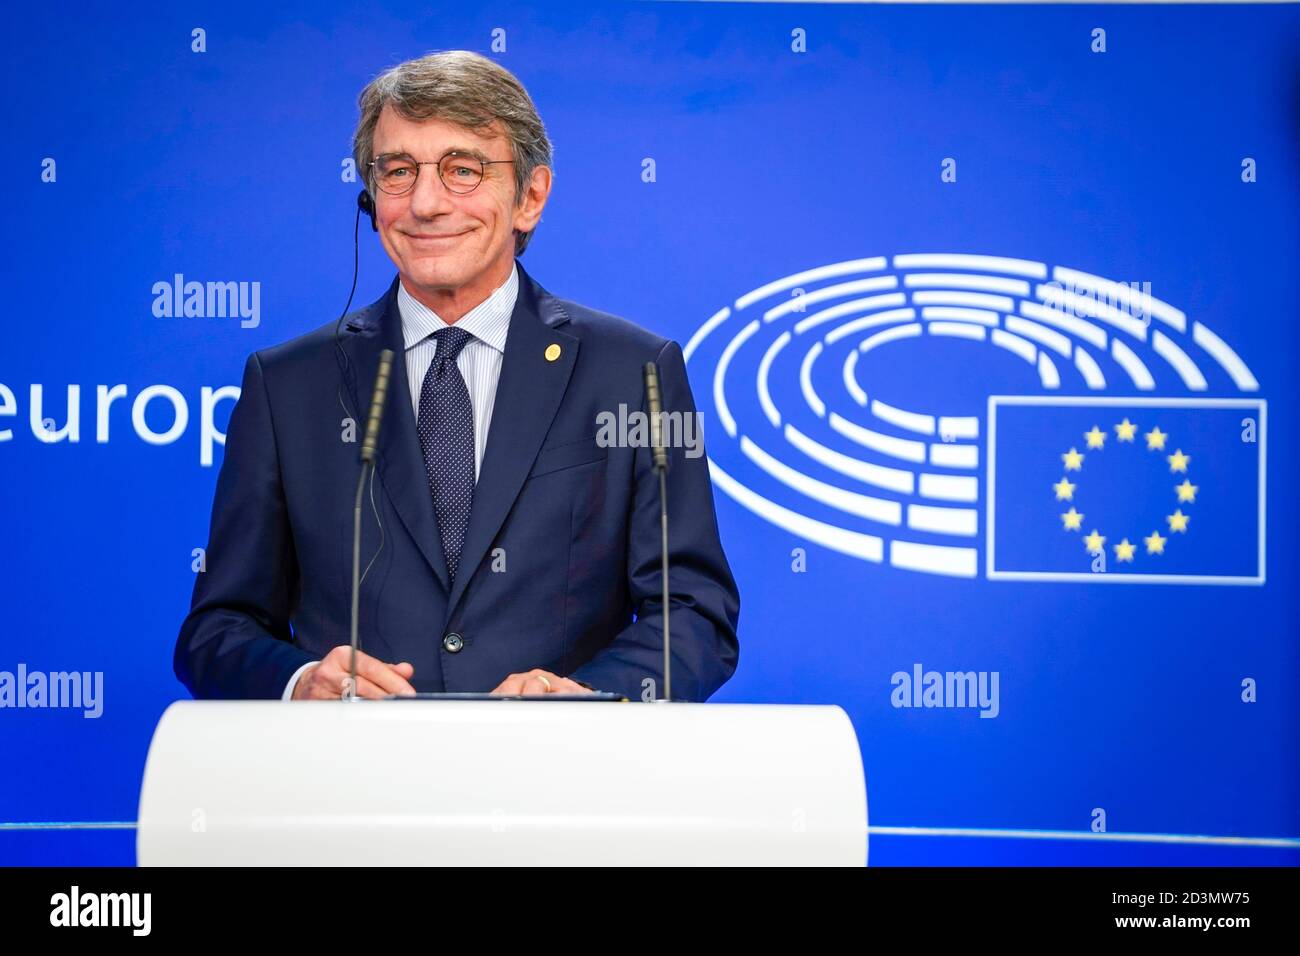 (201008) -- BRUSSELS, Oct. 8, 2020 (Xinhua) -- The President of the European Parliament David Sassoli attends a press conference in Brussels, Belgium, Oct. 1, 2020. The President of the European Parliament David Sassoli said Thursday that he had decided to self-isolate after contact with a staff member who tested positive for COVID-19. (European Parliament/Daina Le Lardic/Handout via Xinhua) Stock Photo